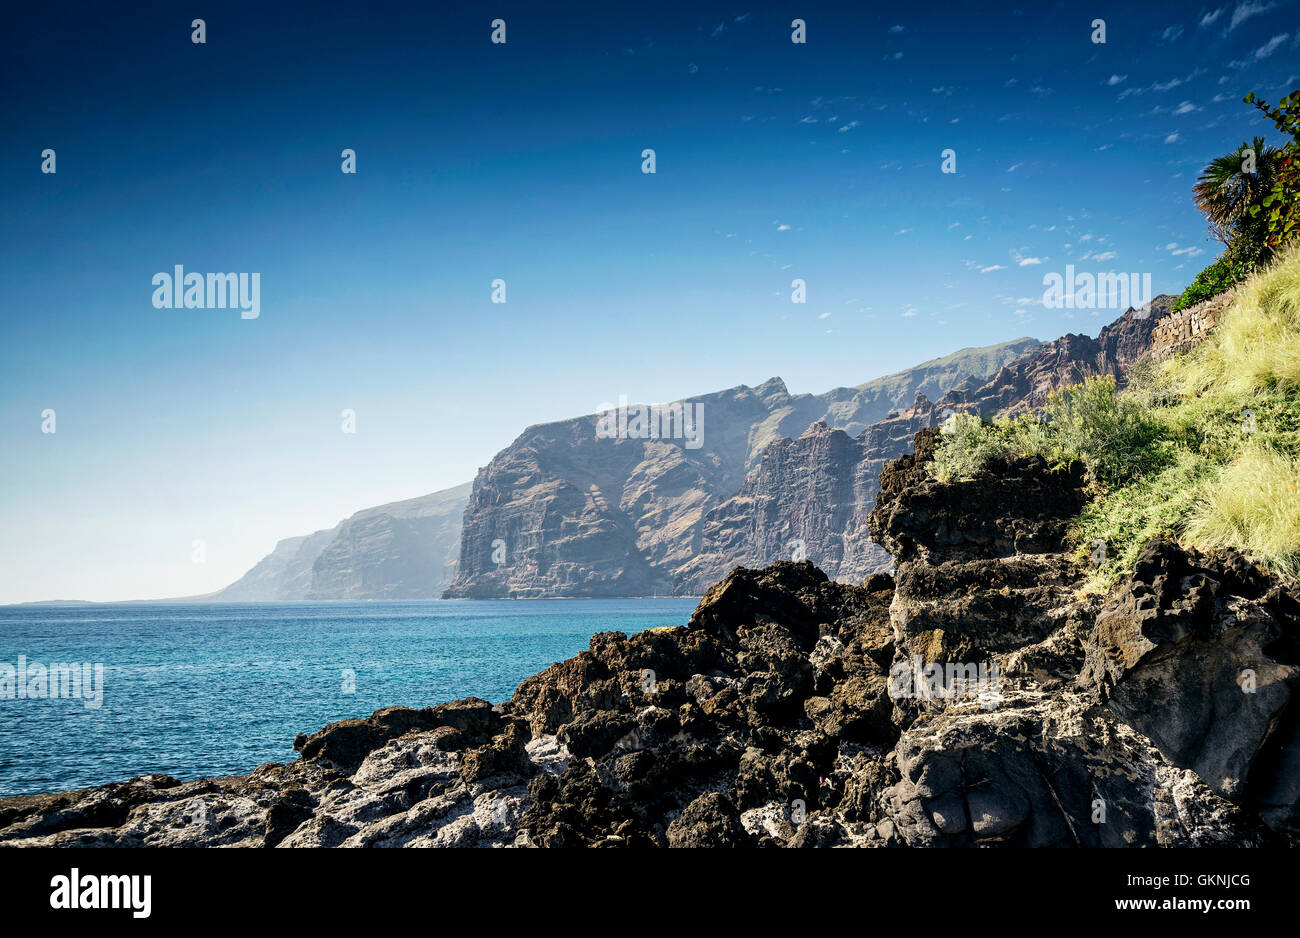 los gigantes cliffs coast natural landmark and scenery in south tenerife island spain Stock Photo